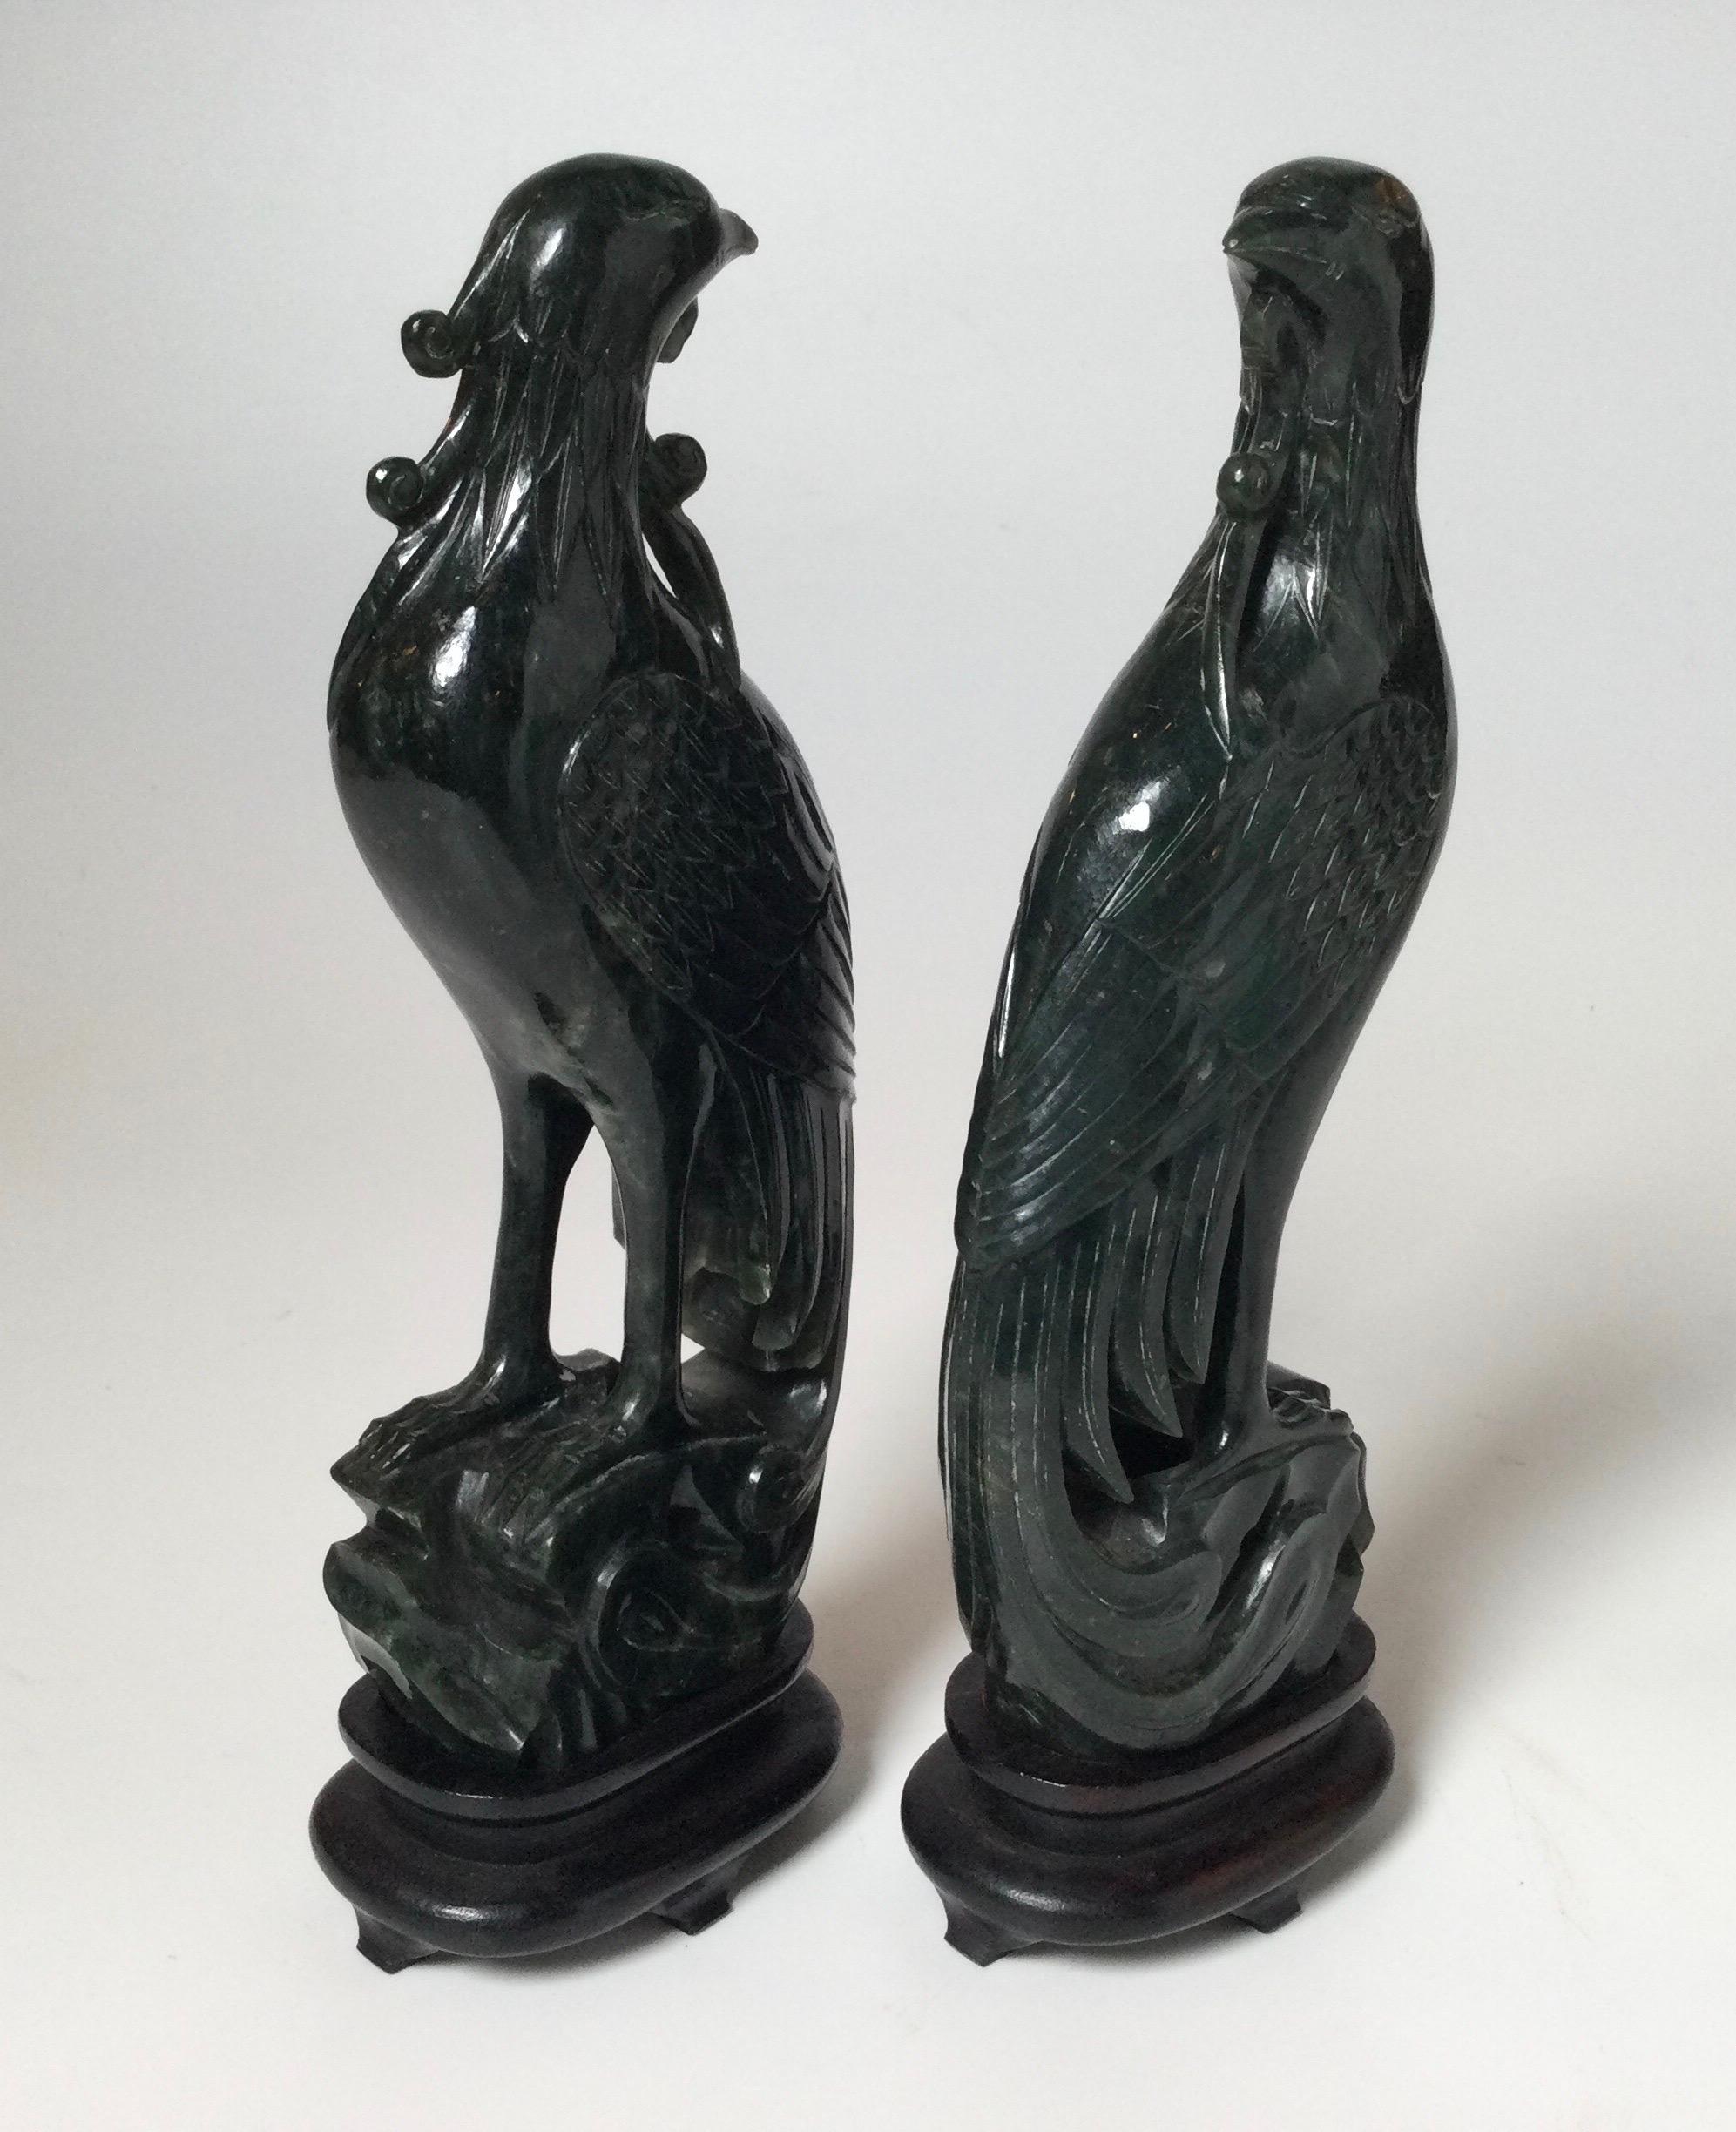 A pair of lovely late 19th / early 20th century hand carved had phoenix bird sculptures with original custom wood bases. The spinach jade is a deep rich jade green without stands measure 8 inches tall, 9.25 inches tall with stands.